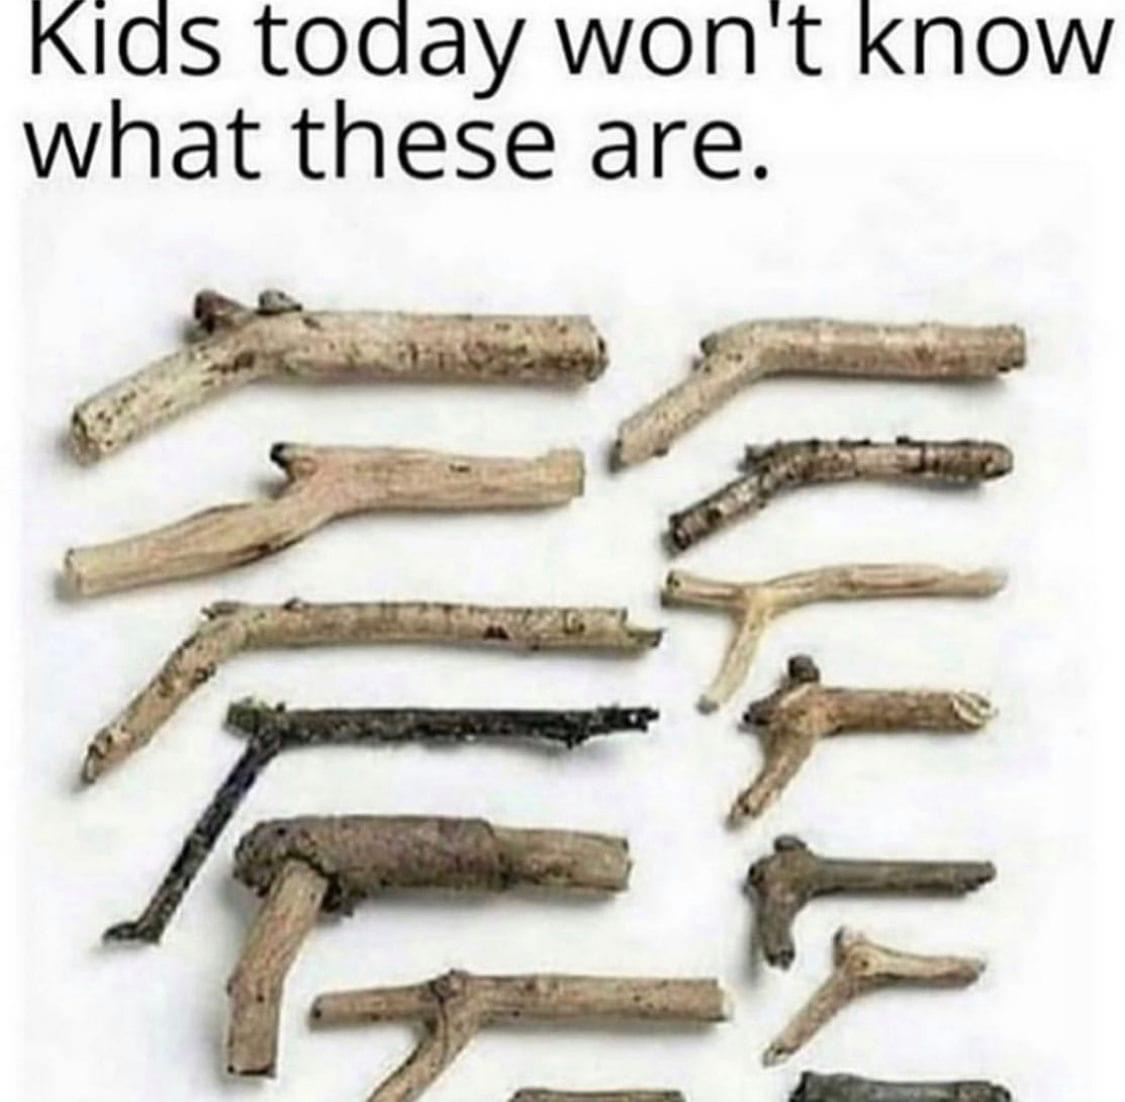 stick gun - Kids today won't know what these are.